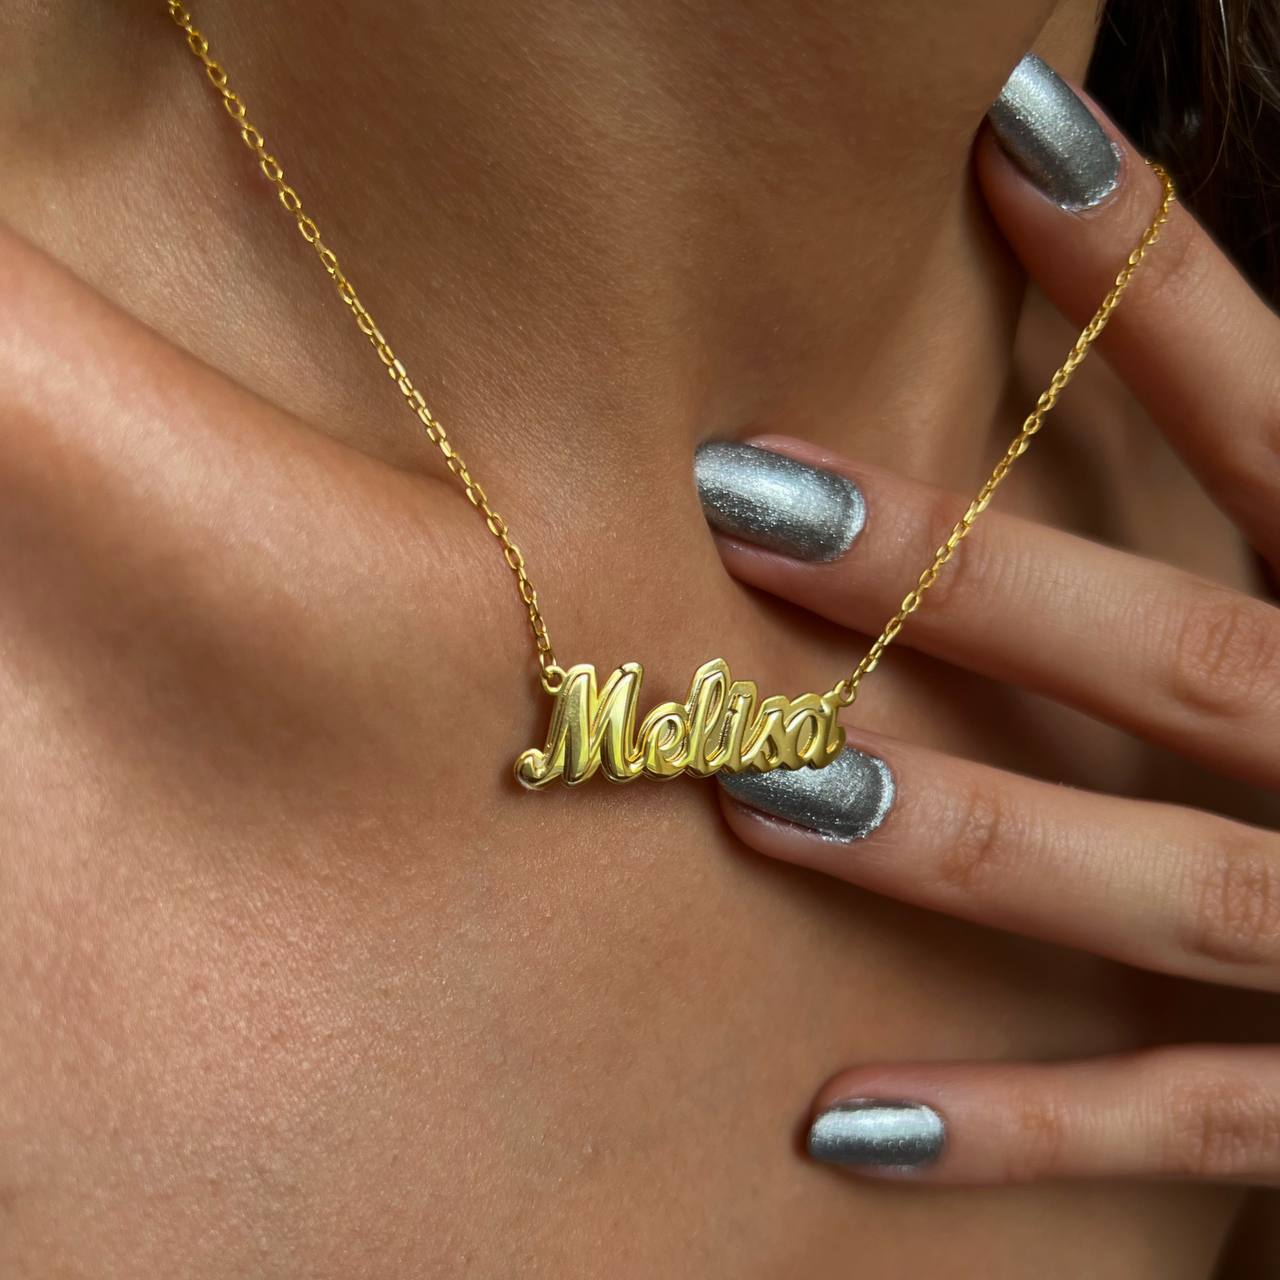 Glittery Name Necklace (8449268646231)